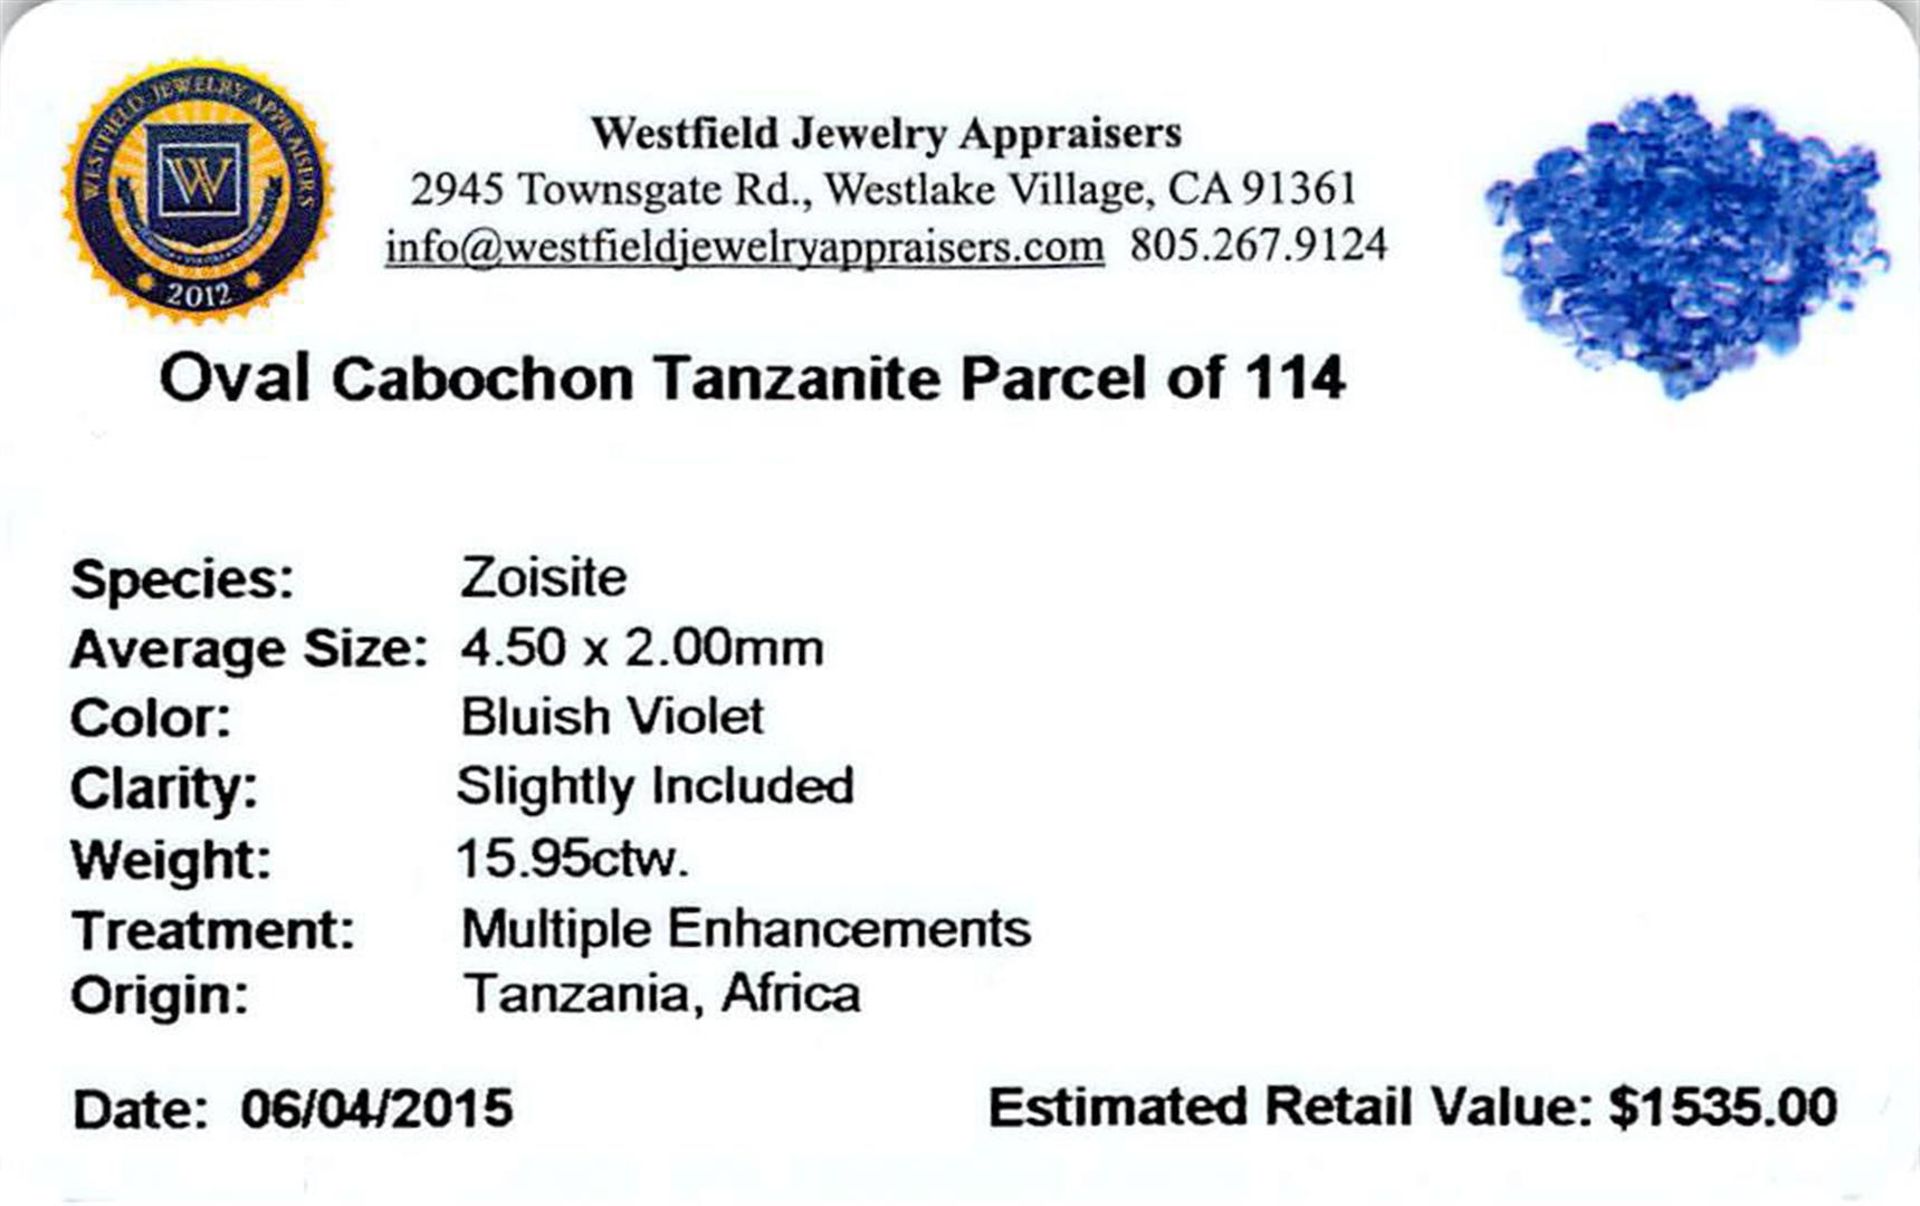 15.95 ctw Oval Mixed Tanzanite Parcel - Image 2 of 2